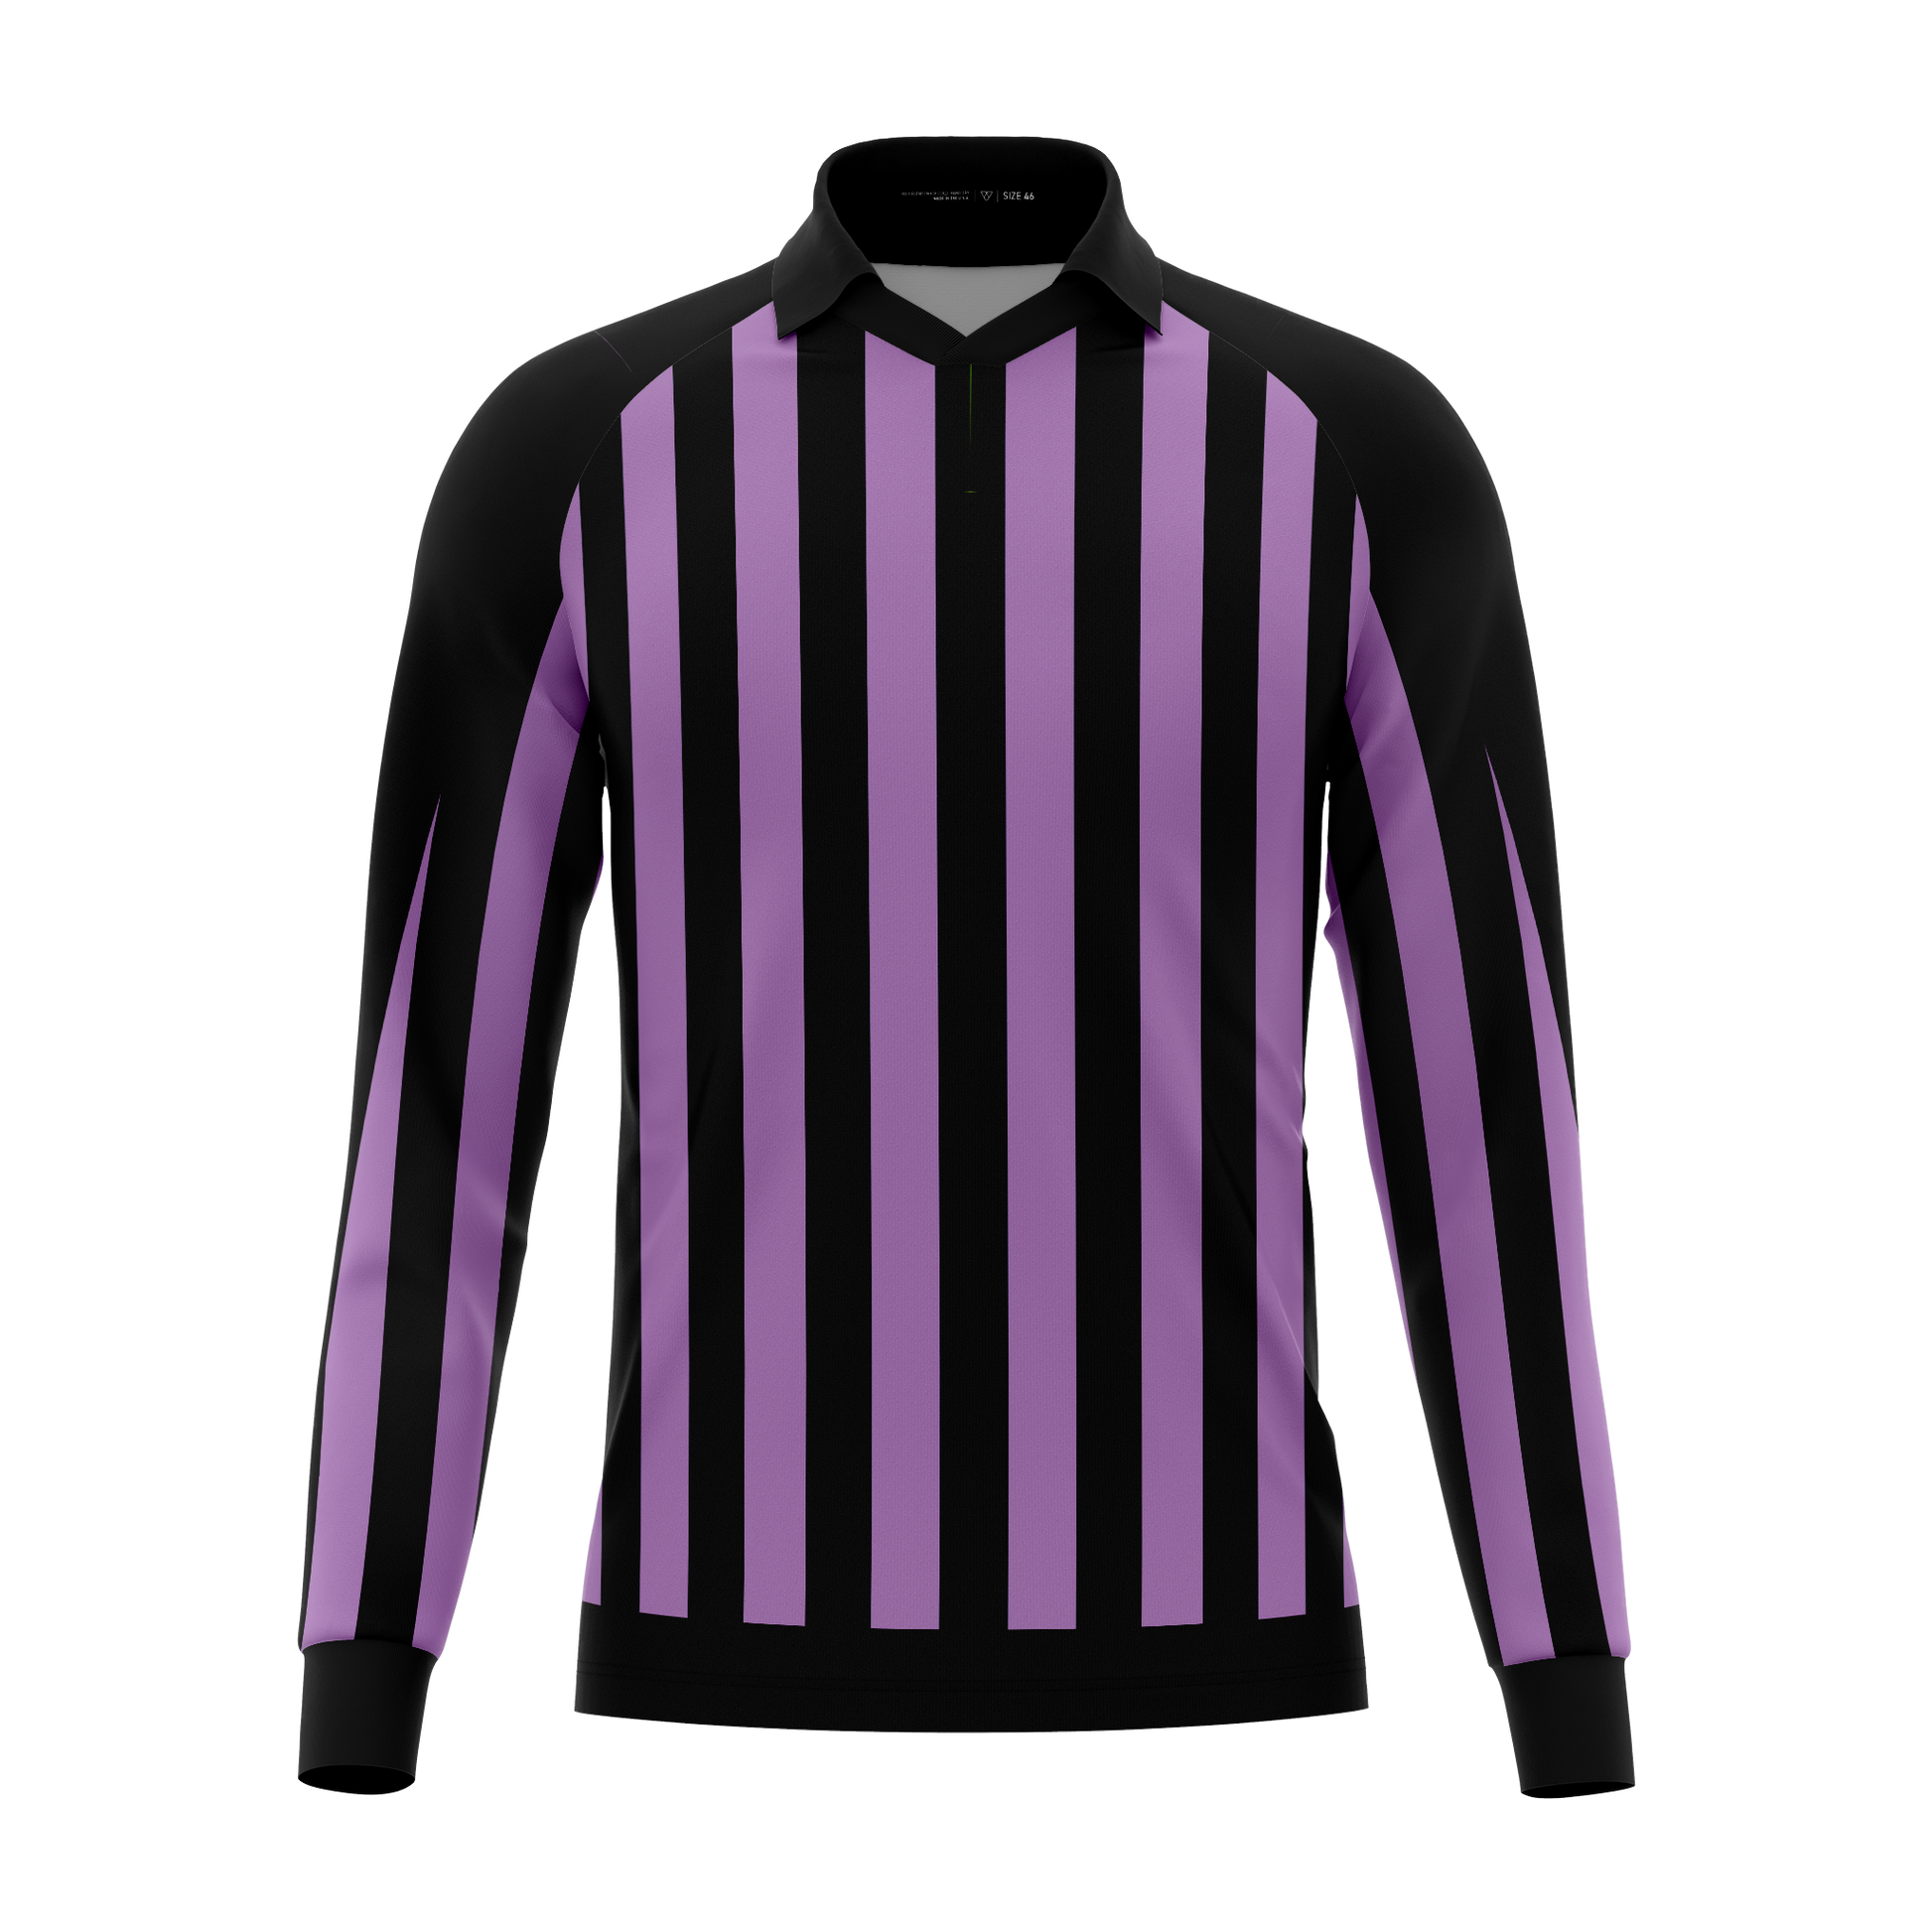 Linesman Purple Jersey Patriot Sports  Front View.  Printed all over in HD on premium fabric. Handmade in California.